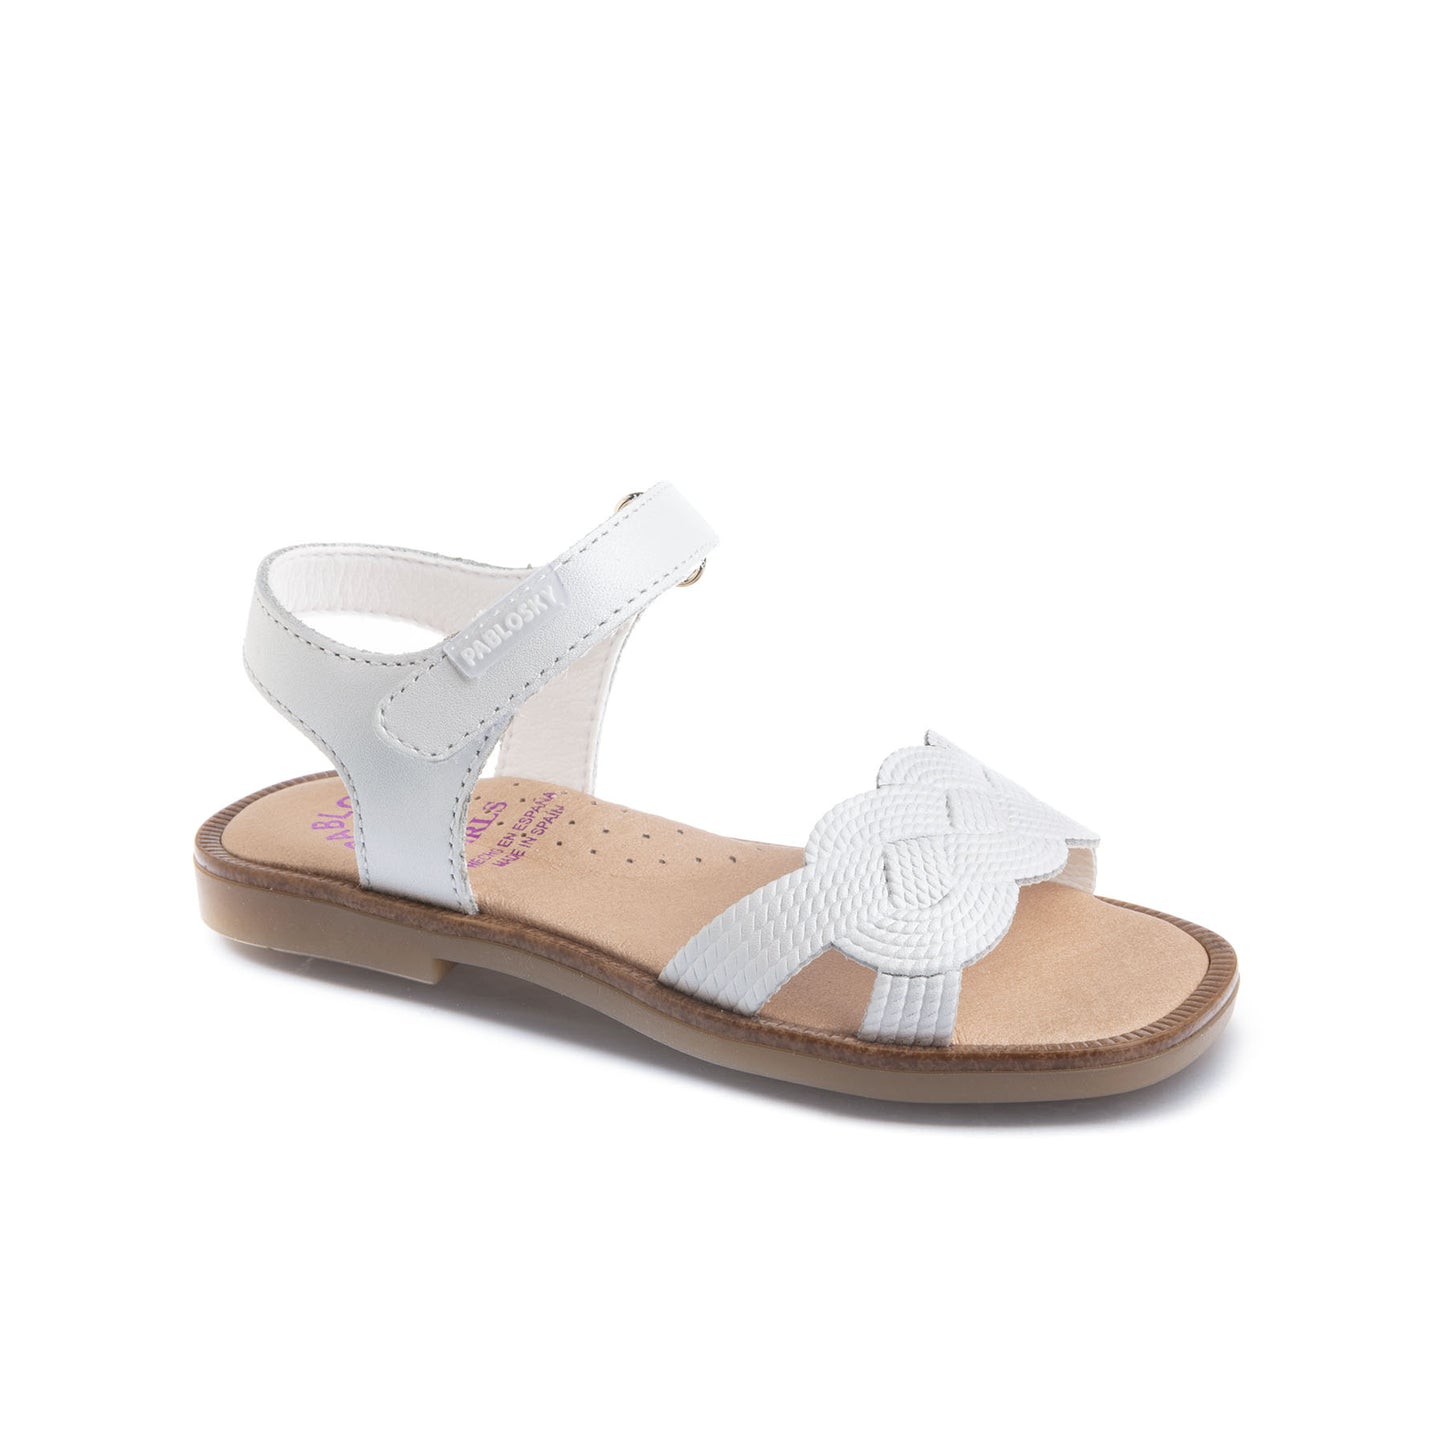 Pablosky Leather Sandals / 419408